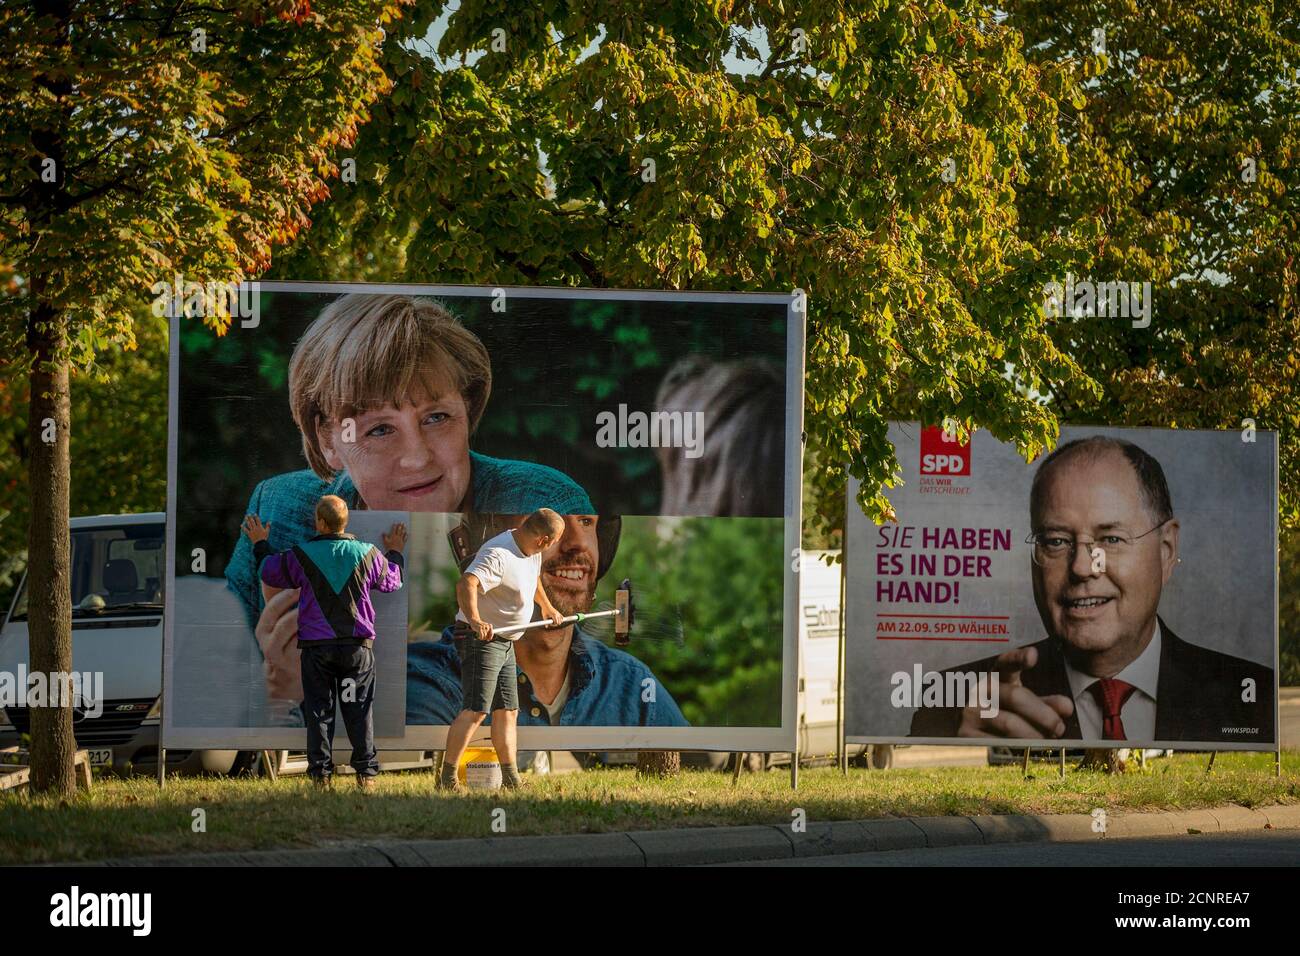 Workers paste up an election poster showing the top candidate of the Christian Democratic Union (CDU) in the upcoming German general elections, German Chancellor Angela Merkel, in Berlin, August 26, 2013. Pictured to the right is an election poster showing the top candidate of the Social Democratic Party (SPD) Peer Steinbrueck. German voters will take to the polls in a general election on September 22.  REUTERS/Thomas Peter (GERMANY  - Tags: POLITICS ELECTIONS) Stock Photo